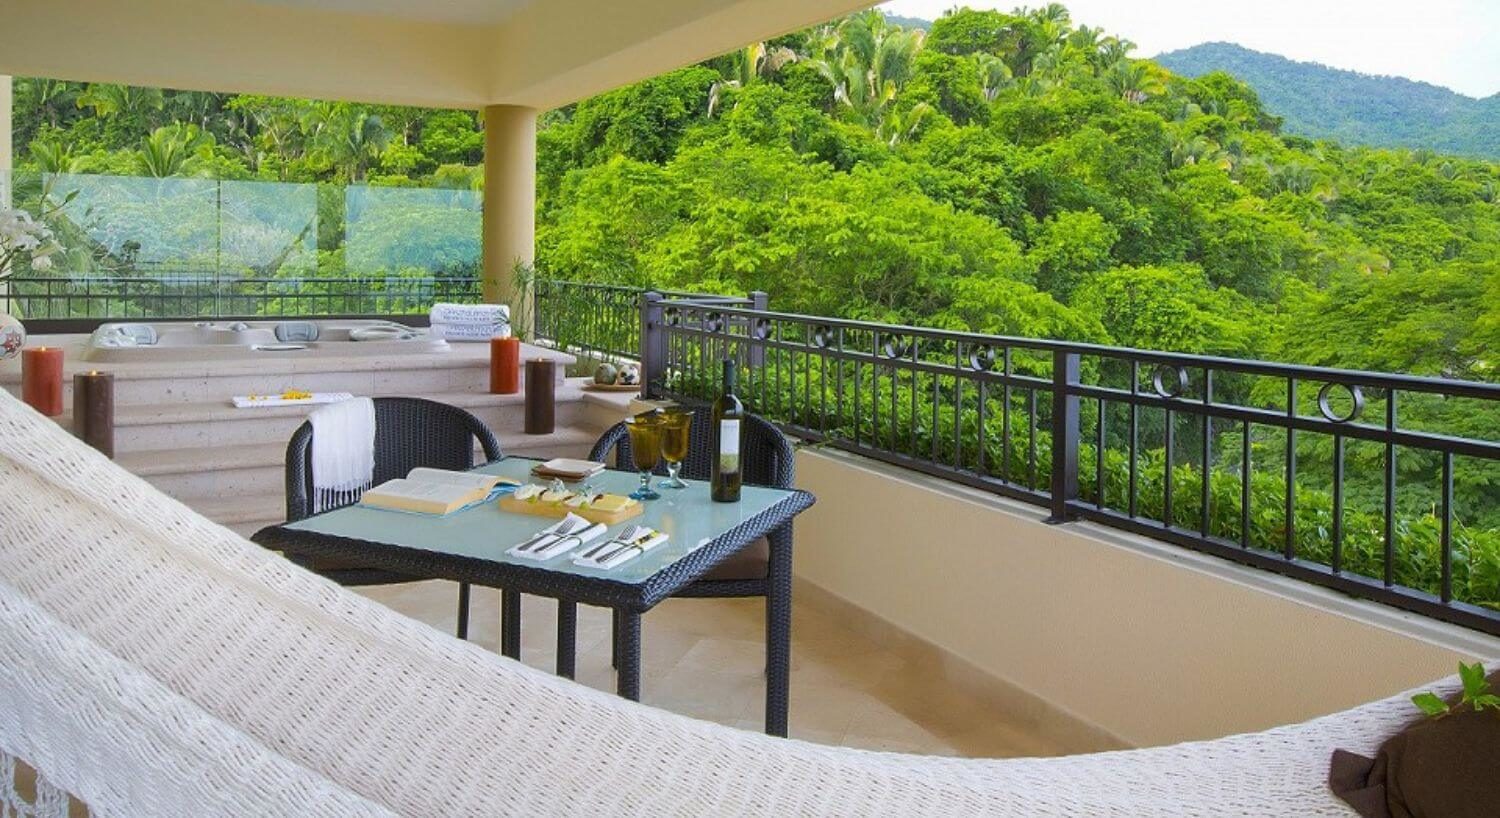 A private balcony with a hammock, dining table and chairs, hot tub, and the lush greenery of the mountain side.